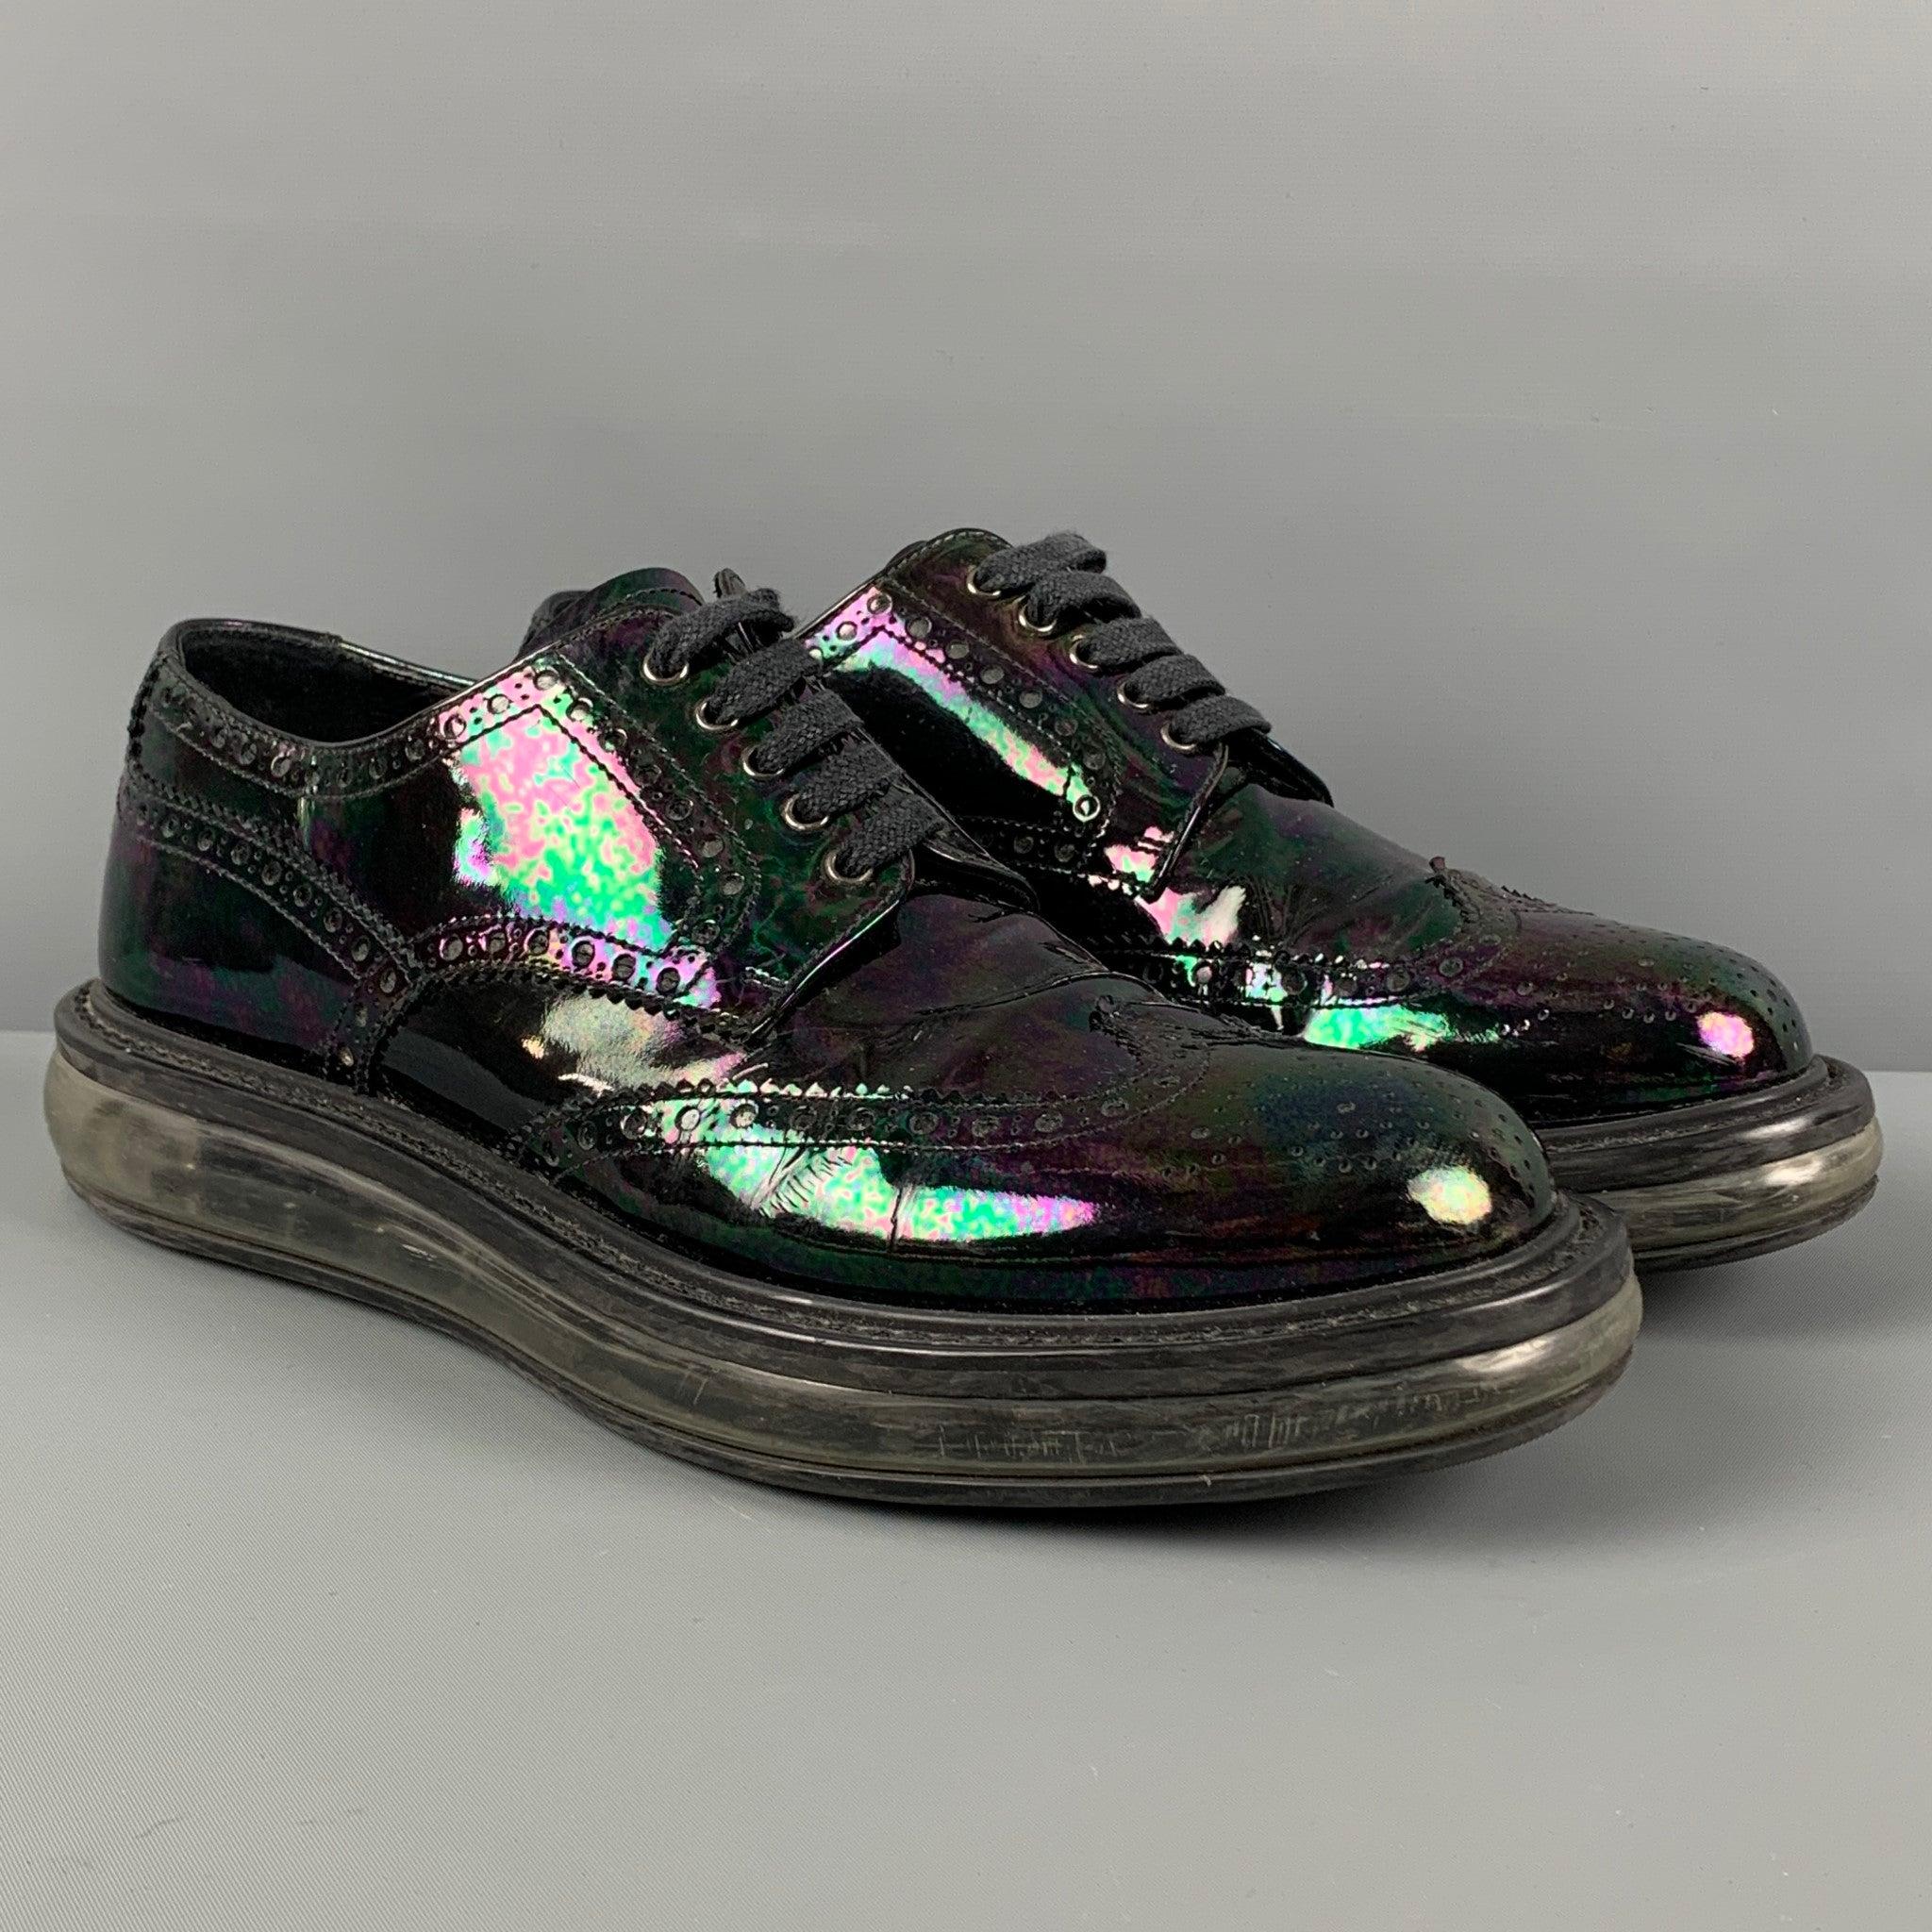 PRADA shoes comes in a black iridescent patent leather featuring a transparent rubber sole and a lace up closure. Made in Italy.
Very Good
Pre-Owned Condition. 

Marked:   2EE 098 6.5Outsole: 12 inches  x 4.5 inches 
  
  
 
Reference: